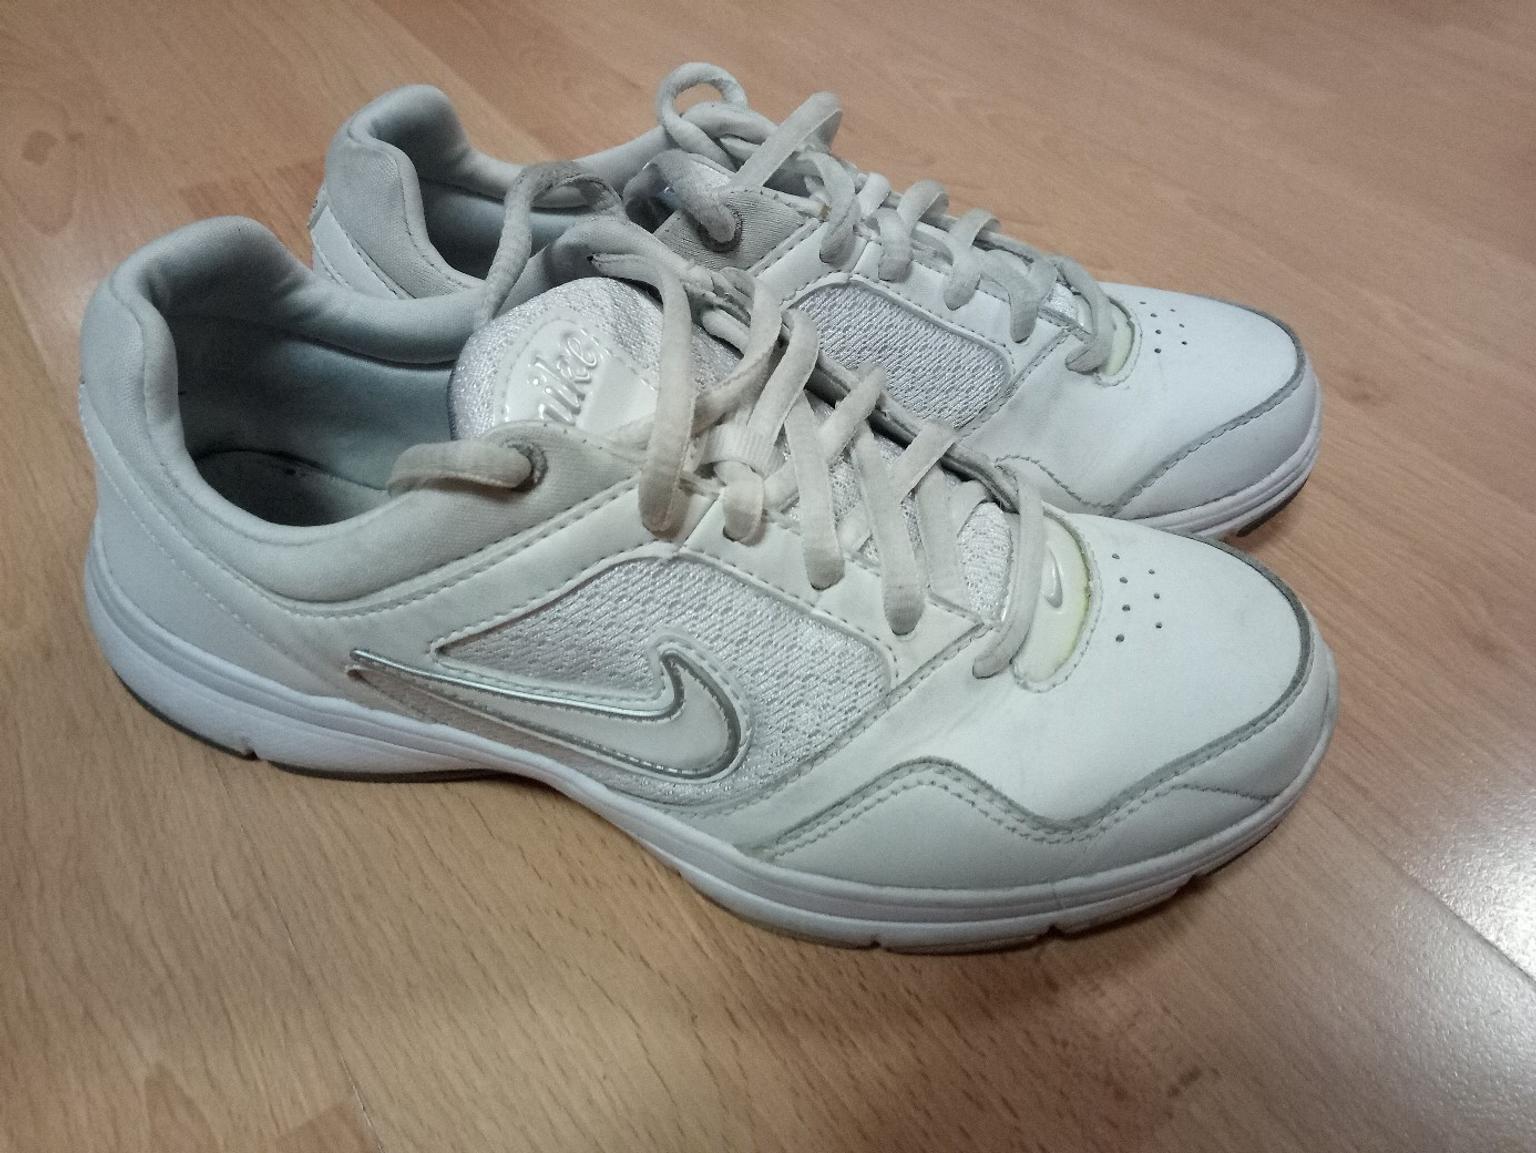 size 4 white nike trainers